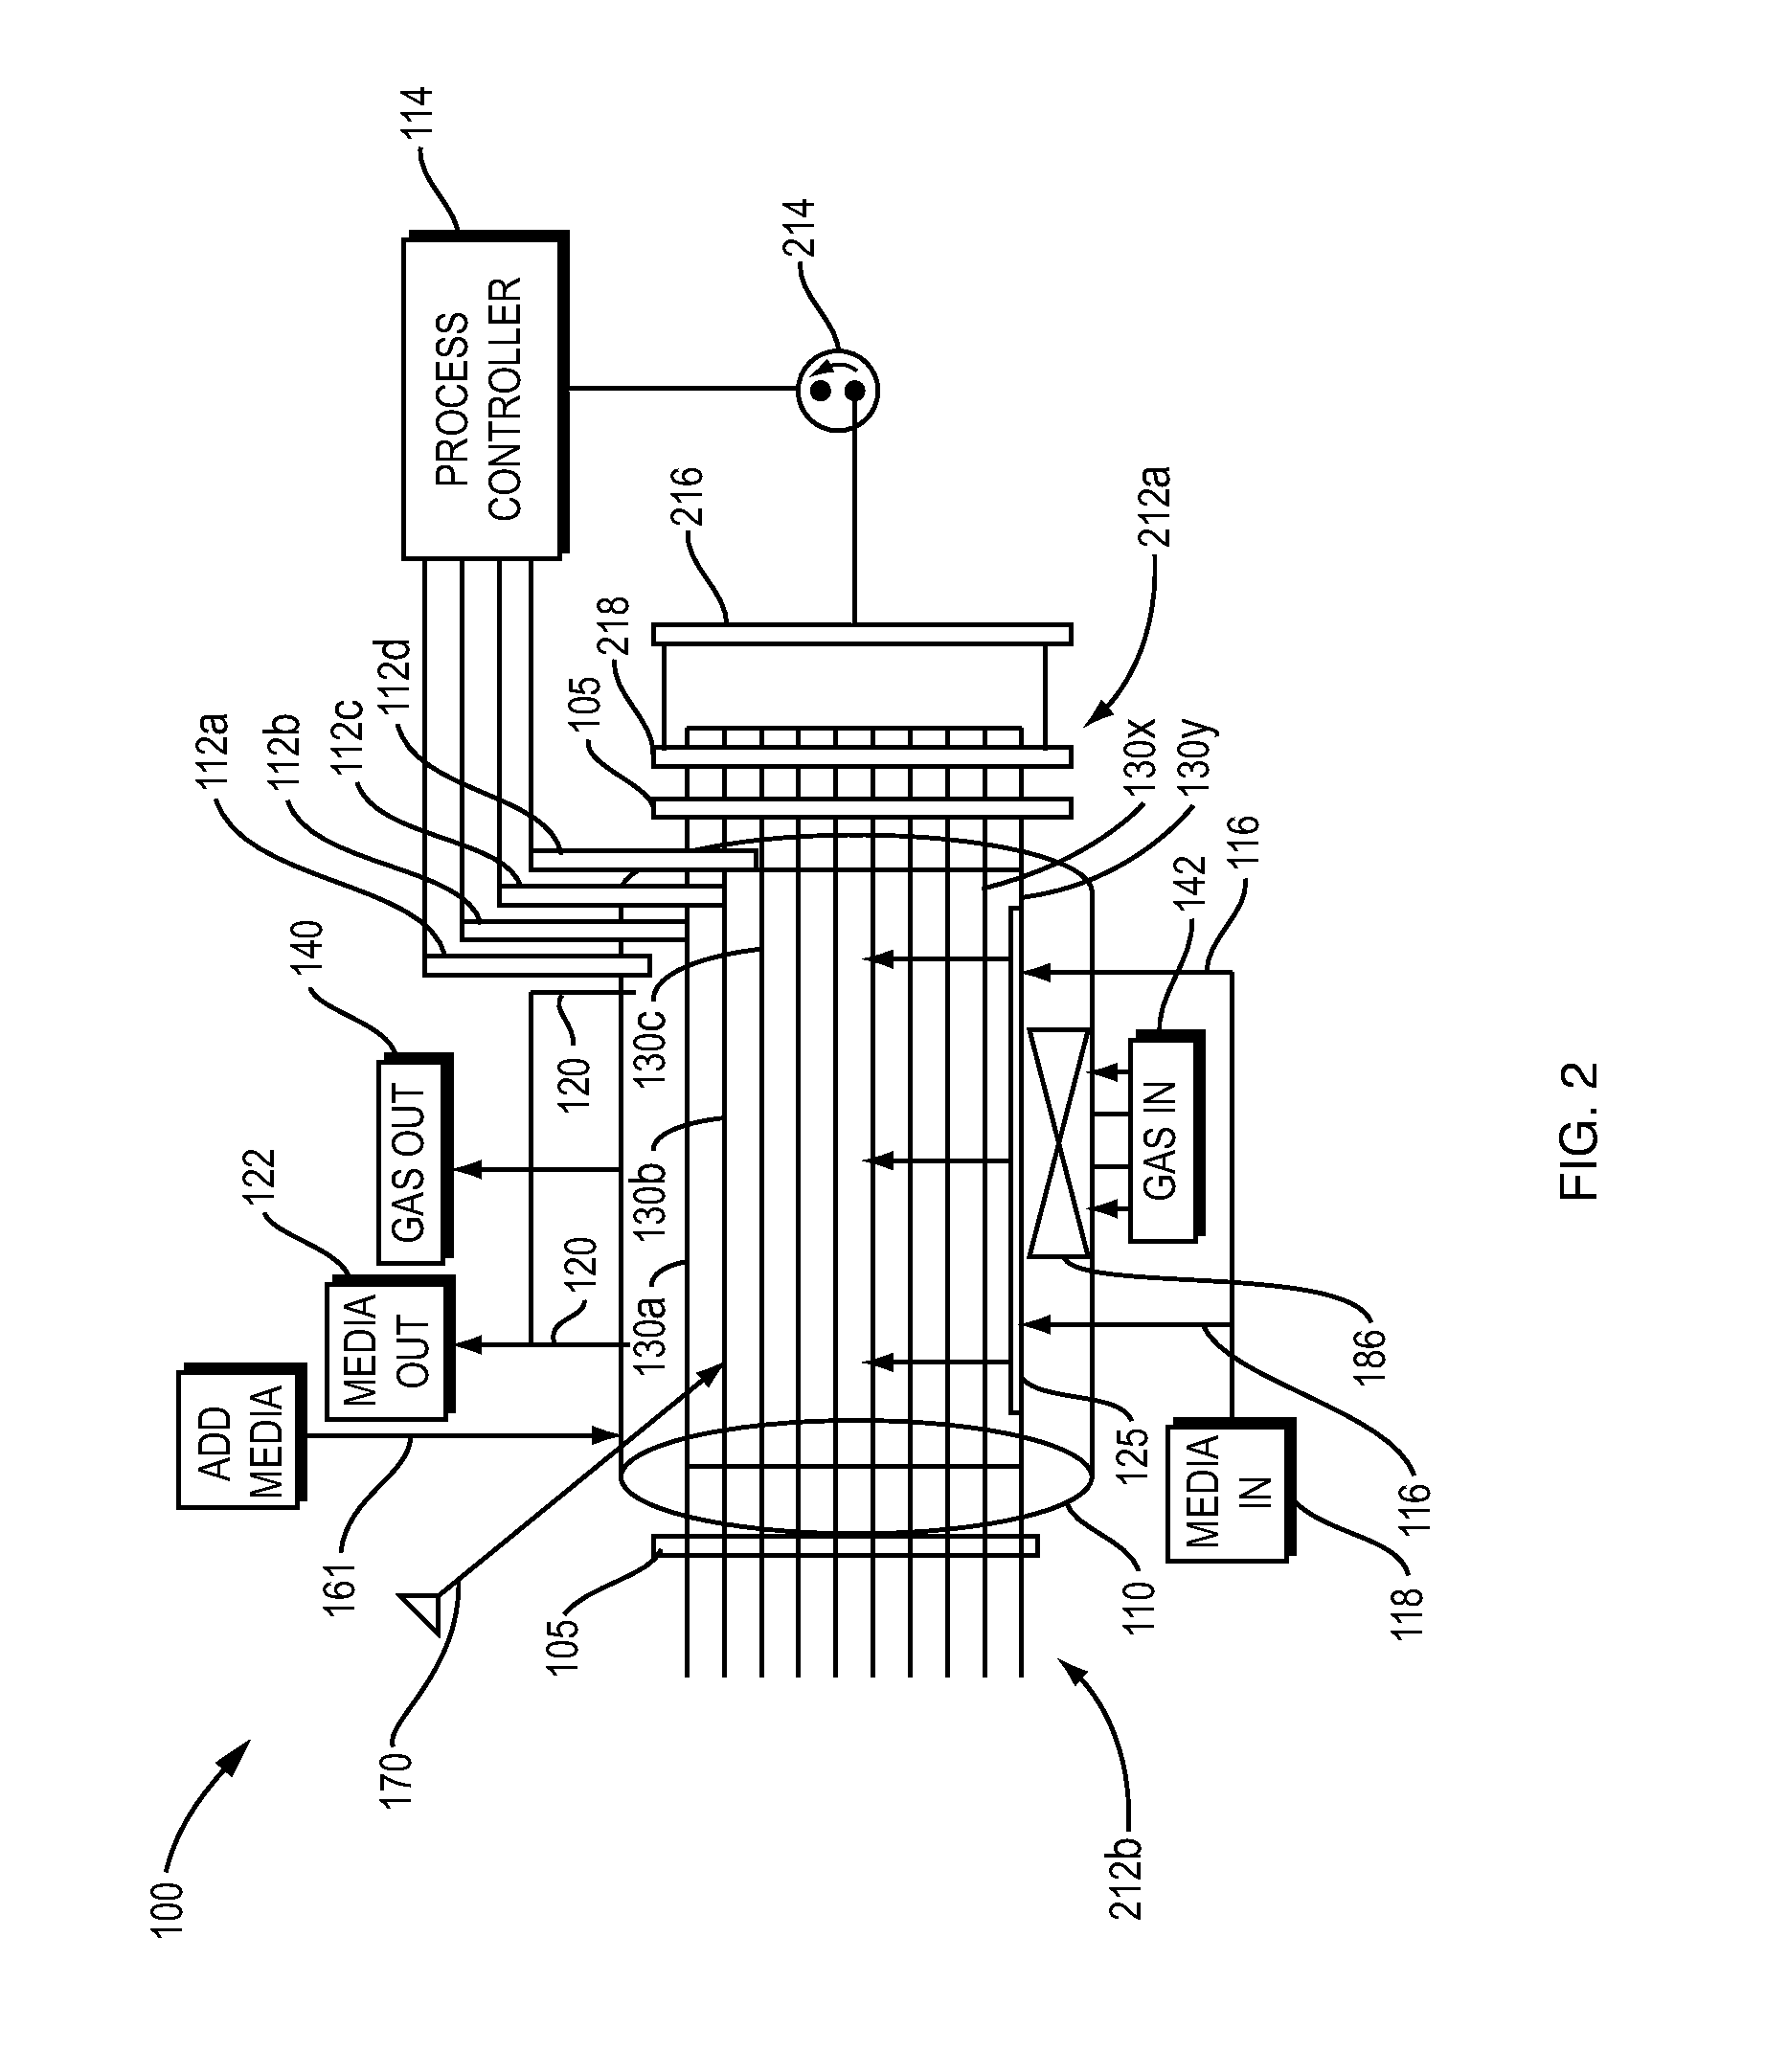 Tissue and organ graft bioreactor and method of operation